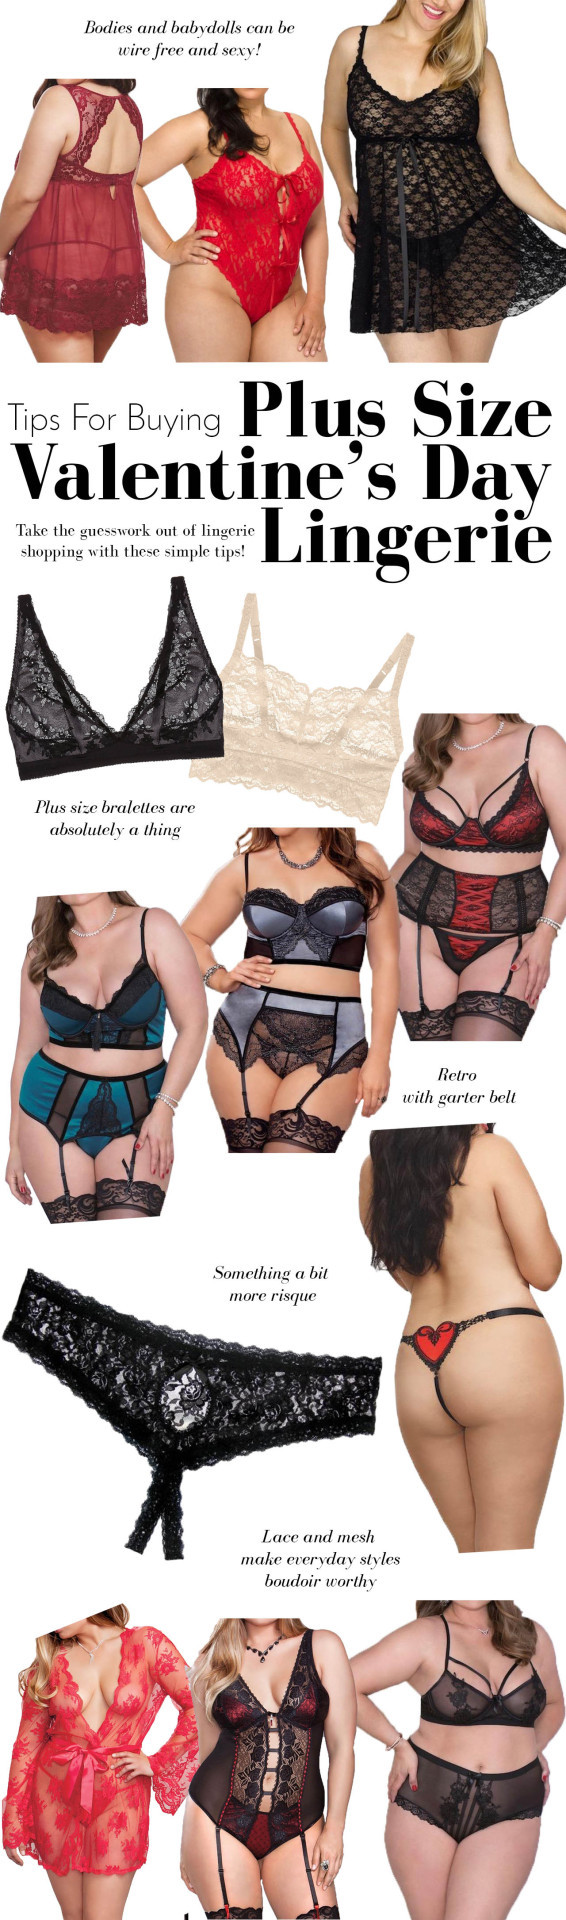 https://curiousfancy.com/wp-content/uploads/2019/01/tips-for-buying-plus-size-valentines-day-lingerie-0.jpg